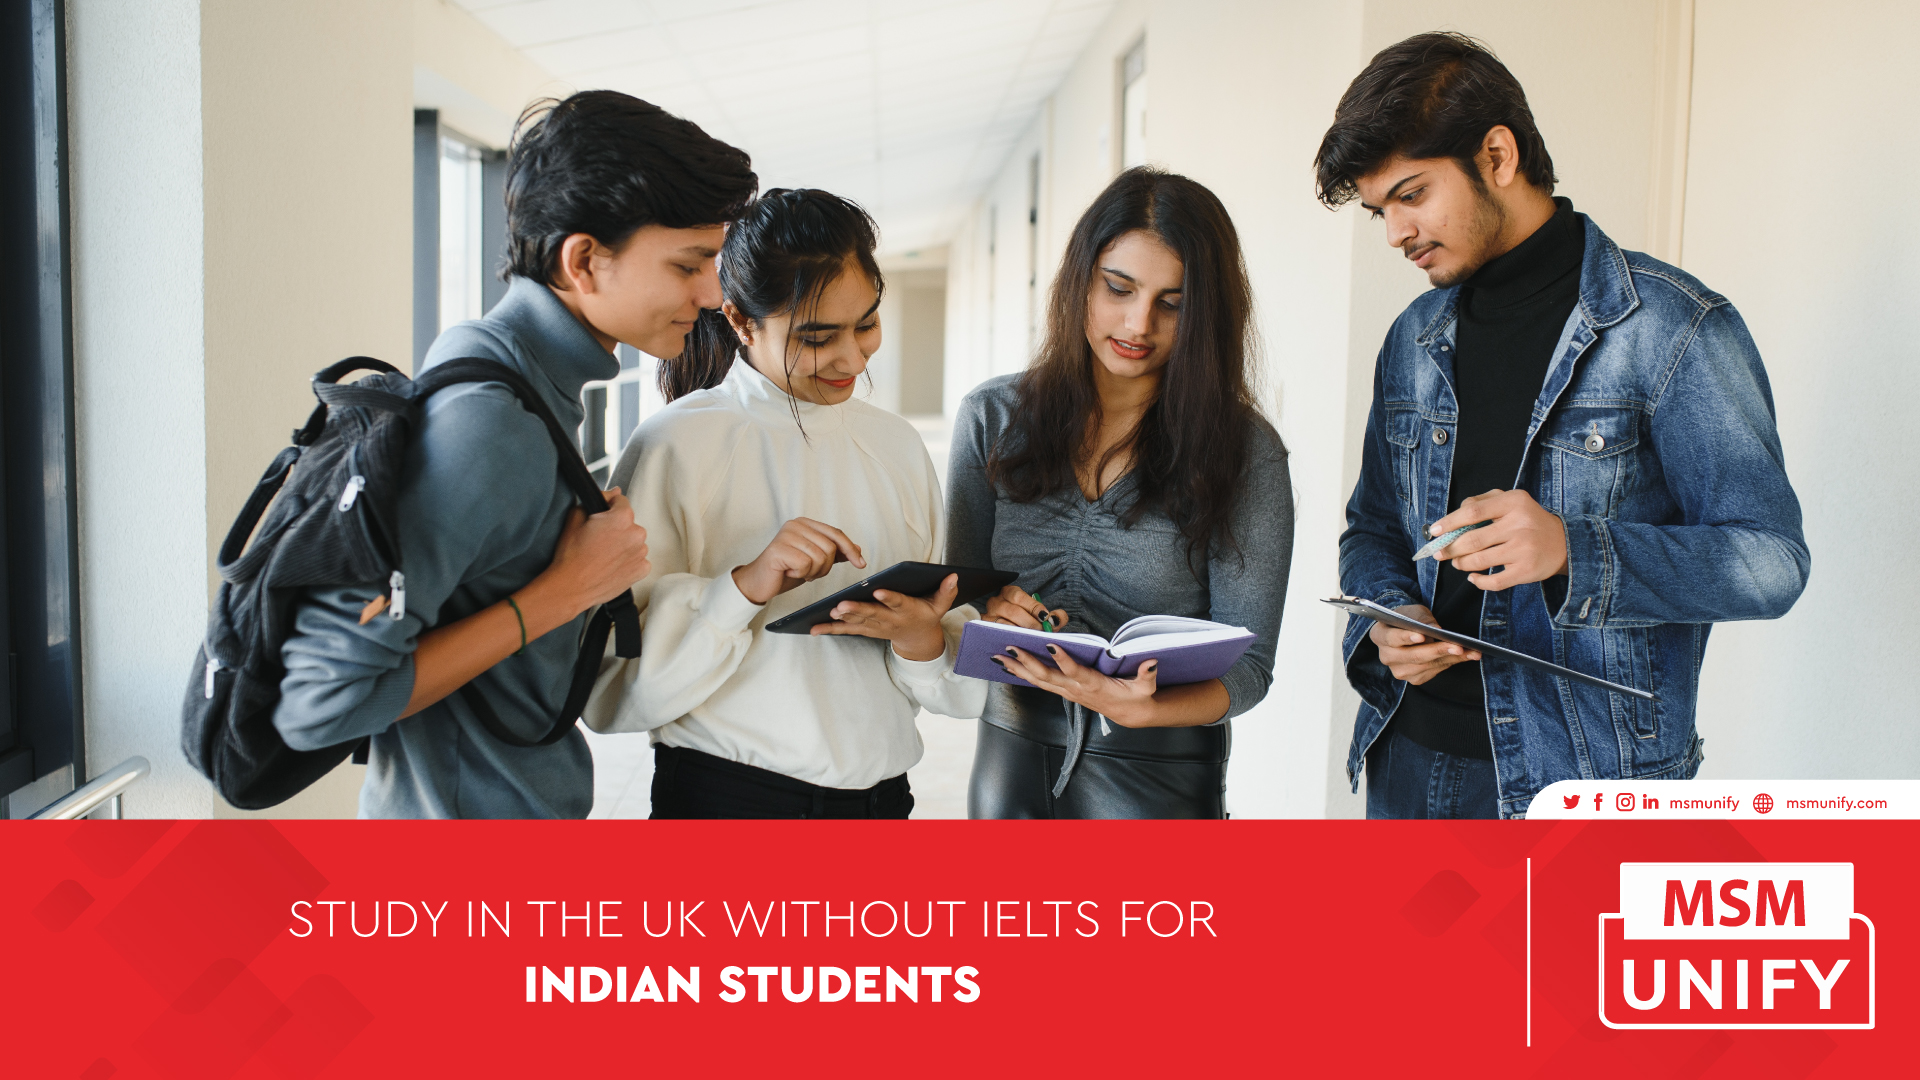 Study in the UK Without IELTS